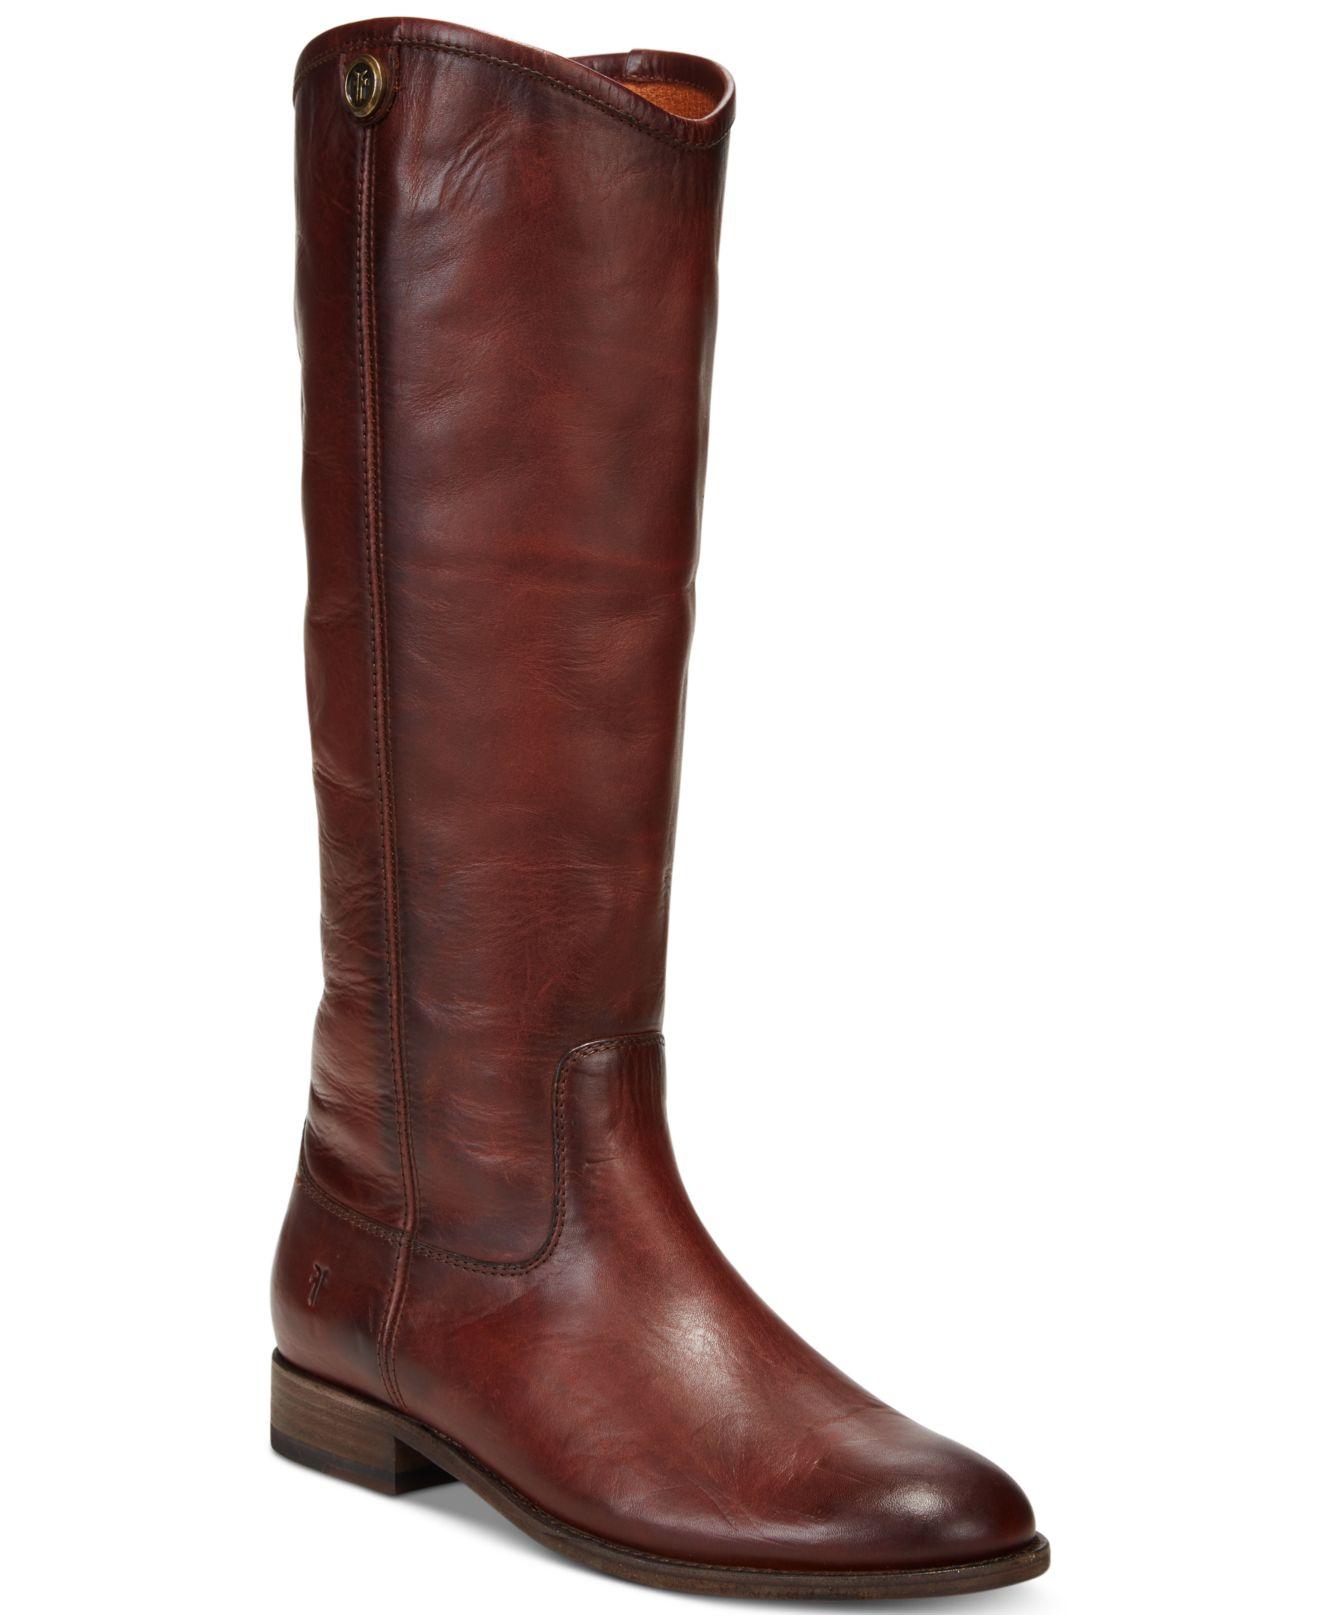 Frye Melissa Button 2 Wide-calf Tall Leather Boots in Dark Red (Red) - Lyst